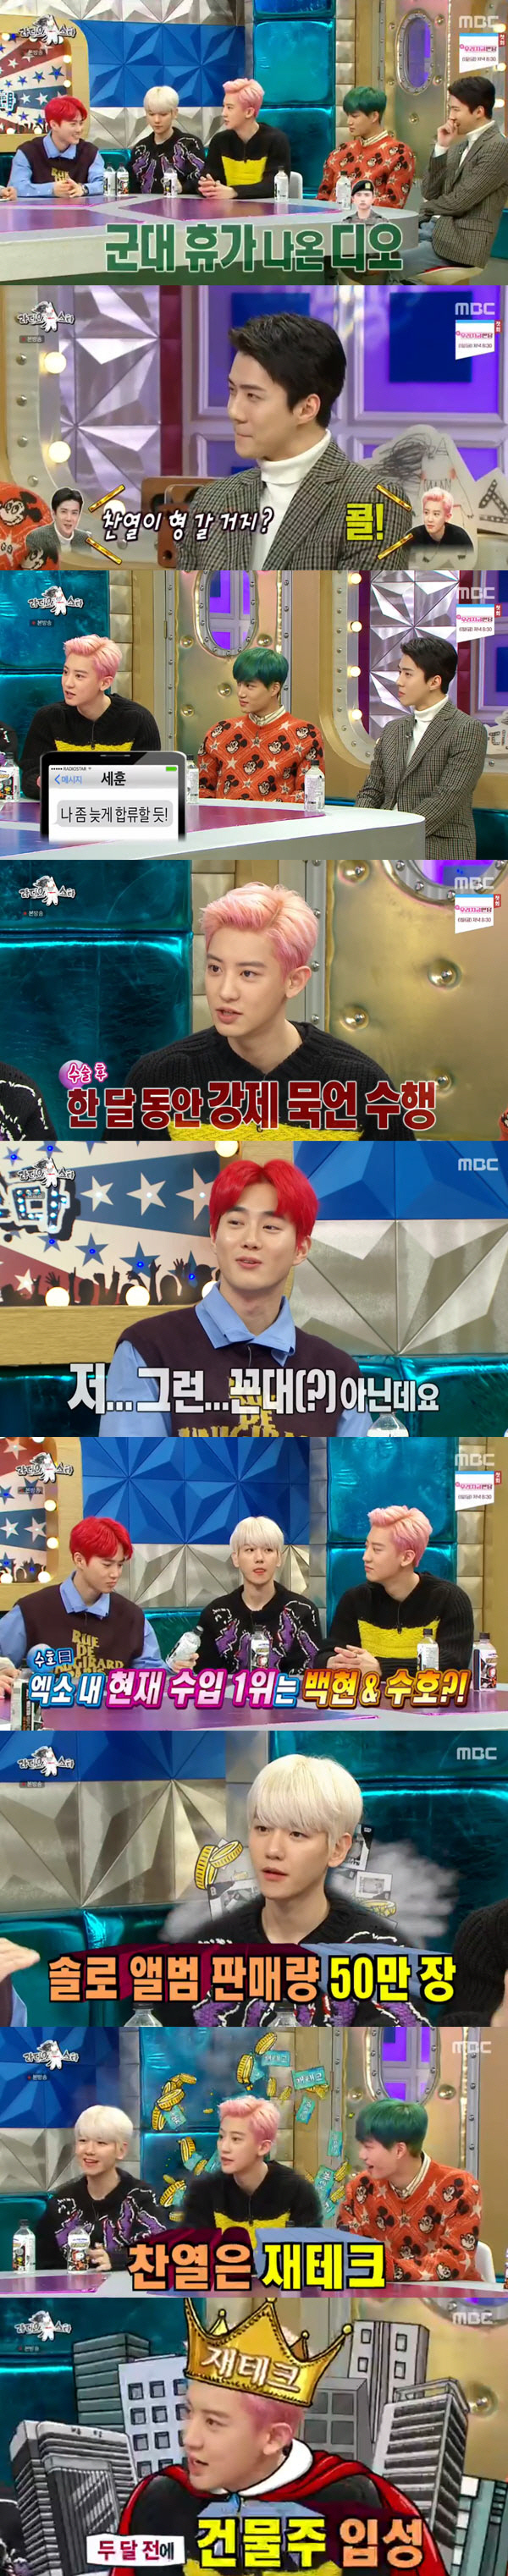 Global Idol EXO is on Radio StarMBC entertainment program Radio Star broadcasted on the 4th was featured as EXO Radio Star feature.EXO members Baekhyun, Kai, Sehun, Suho and Chanyeol appeared as guests and Chen went on to become a special MC.As soon as EXO appeared in the studio, Kim asked Suho to abs and embarrassed Suho. Baekhyun was also embarrassed, saying, Its been less than five minutes since I came in.However, Chanyeol naturally said, This is not what you do, but what others do. Suhos clothes were raised to reveal his abs and make the atmosphere hot from the beginning.The members doubted Chens ability to proceed as a special MC. Chanyeol said, Chens performance is not at all expected. Chen is good and serious.I think I will be attacked by the members. Sehun said, When Chen said that he was doing MC, Suho was reminded of him. Suho is motivated and passionate.I think I was jealous. When MCs asked, Did you feel sad? Suho said, I thought it was wrong.I wanted to be here because Chen was here. The members also honestly told the story of the income. Baekhyun, whose solo album sales amounted to 500,000, ranked first among the members.I also lived hard, doing musicals, doing movies, Suho said.Kai is an embezzler of luxury brands, and Chanyeol is making personal income from financials, Confessions said.In particular, Chanyeol said, In fact, I became a landlord two months ago. At that time, my mind became very relaxed.Kim Gura pointed to Suho and asked the members, What criteria do you choose the leader? Baekhyun said, When I think about it, he is the person who can keep the most neutral.However, he added a joke, Its good there and the house is good.Although he added a joke, the members agreed that Suho was a leader who took care of mental health.Suho said, Baekhyun was worried about flying when he was performing overseas concert with Super M, so he sent a worried letter saying I drank and laughed.Kai noted that Mental was weak on his own: Its heavily affected by evil, its bad, he said, so I try to avoid evil.I tend to do a lot of self-defeating or regretting it, he said.Sehun also noted that there was a period of mental hardship, though members were able to overcome it.I was happy to be with the members, so I got strength. The time we had been together was not in vain, Sehun said.EXO members who are becoming a great force for each other. Suho said, Members talk about renewal.I have four years left, including whether Im in SM, making another label, or serving in the military. Im thinking with some room, he said frankly.